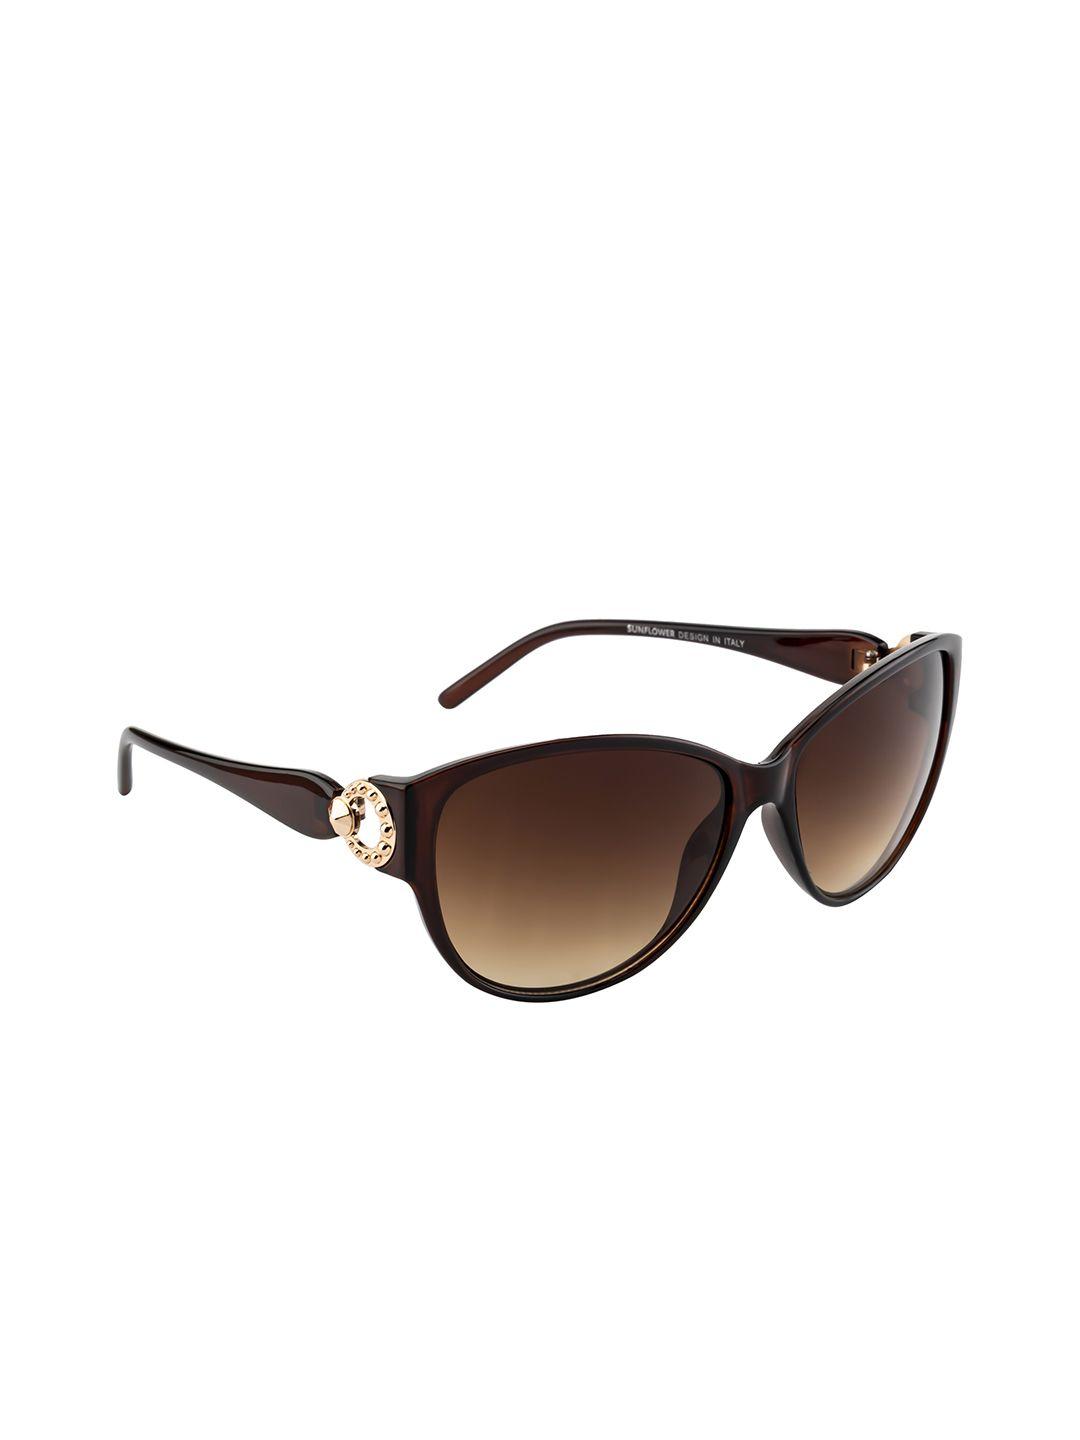 dressberry women cateye sunglasses with uv protected lens db-p8556-c6